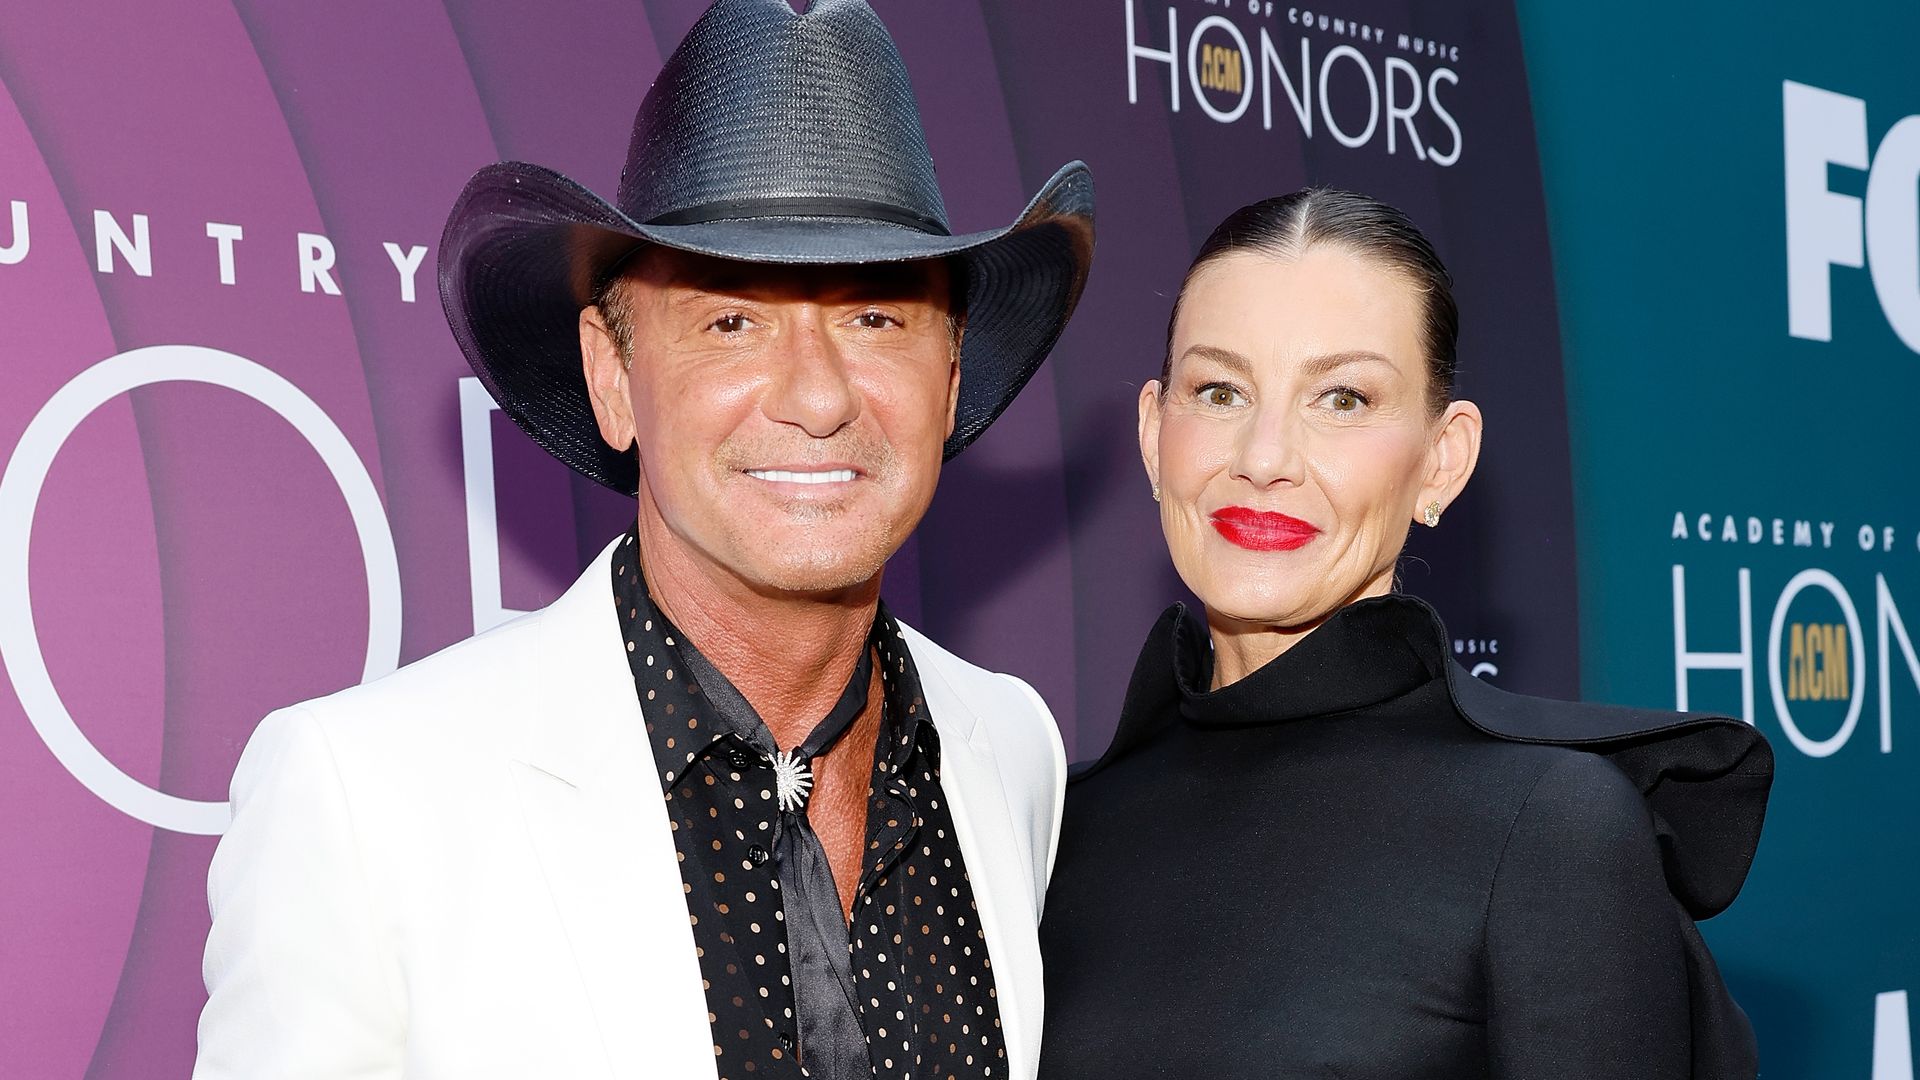 Tim McGraw and Faith Hill's rarelyseen daughter Maggie makes a